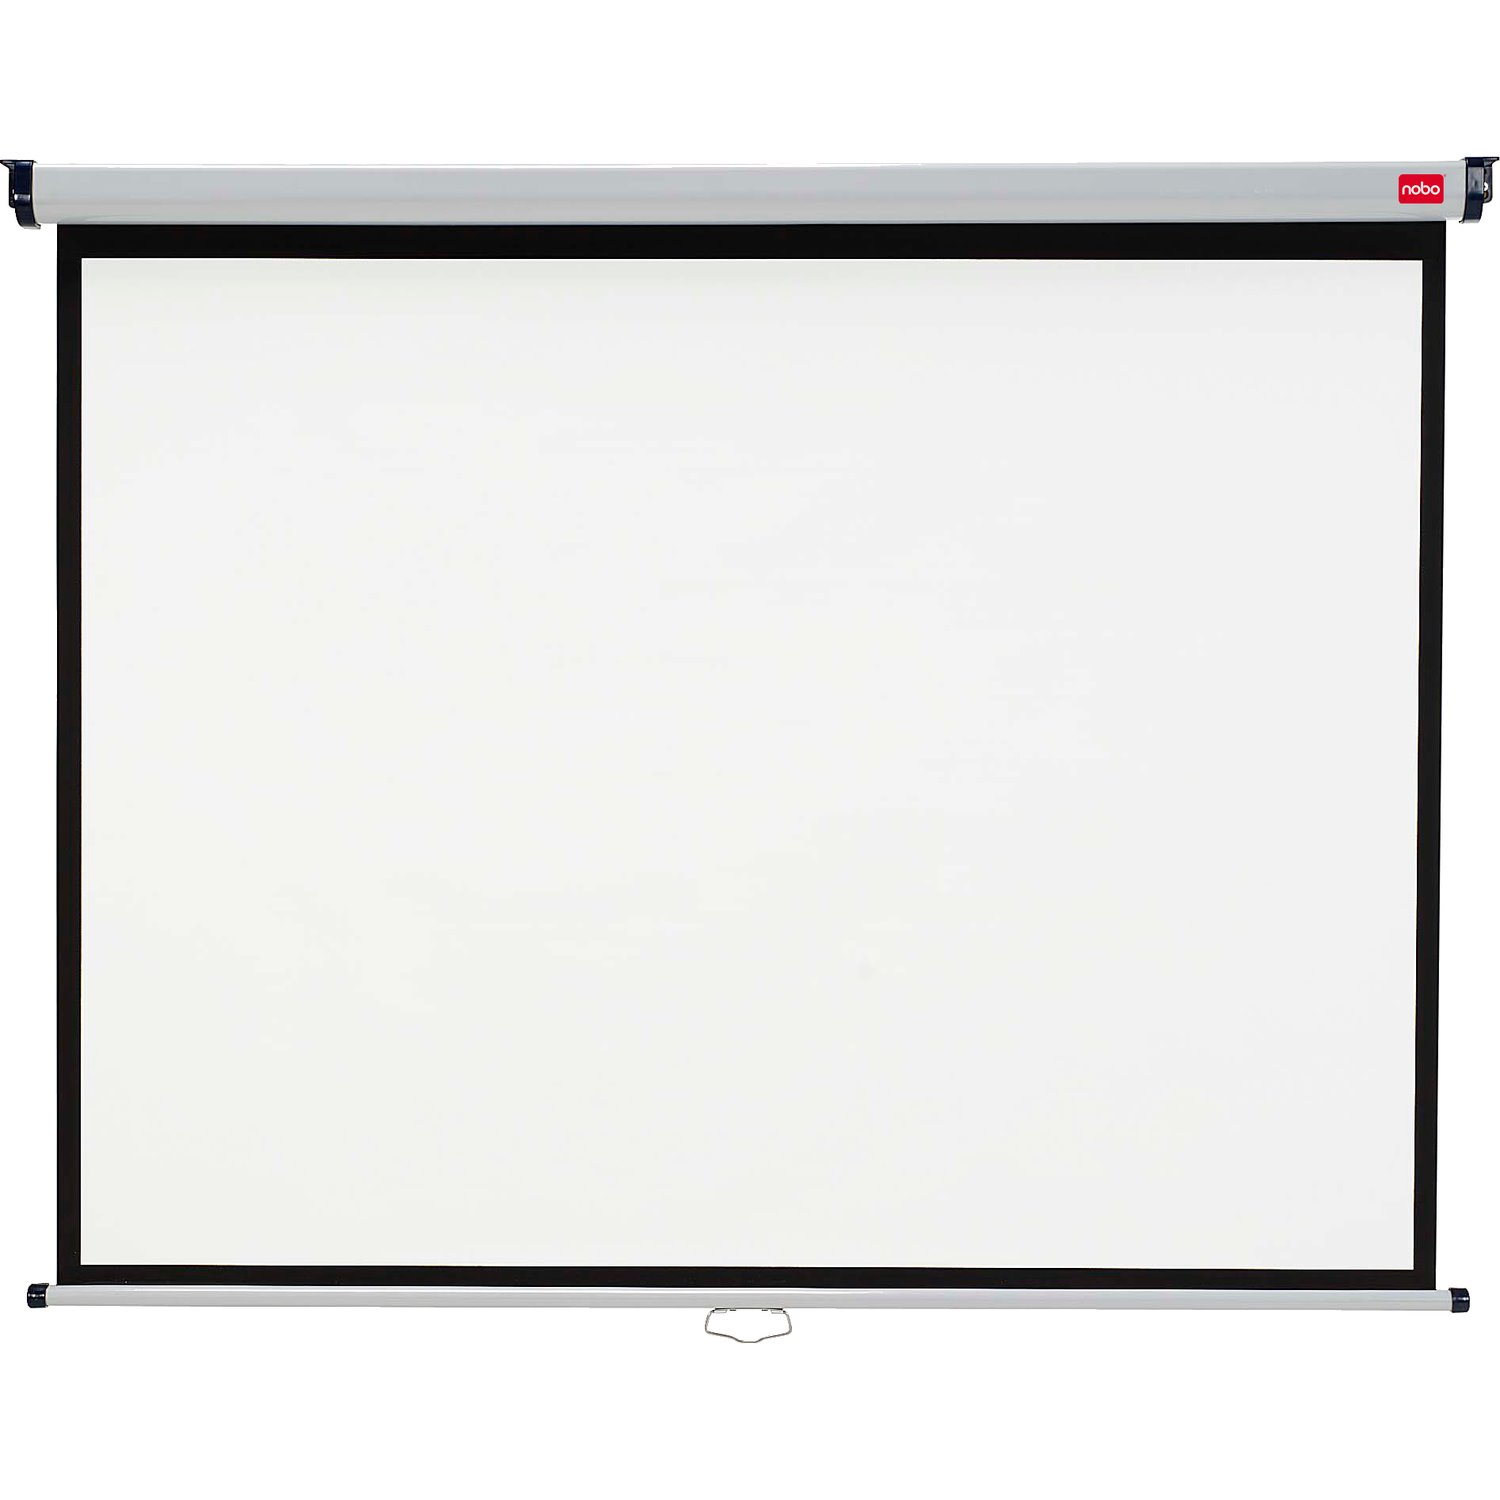 Nobo 1902392 Manual Projection Screen